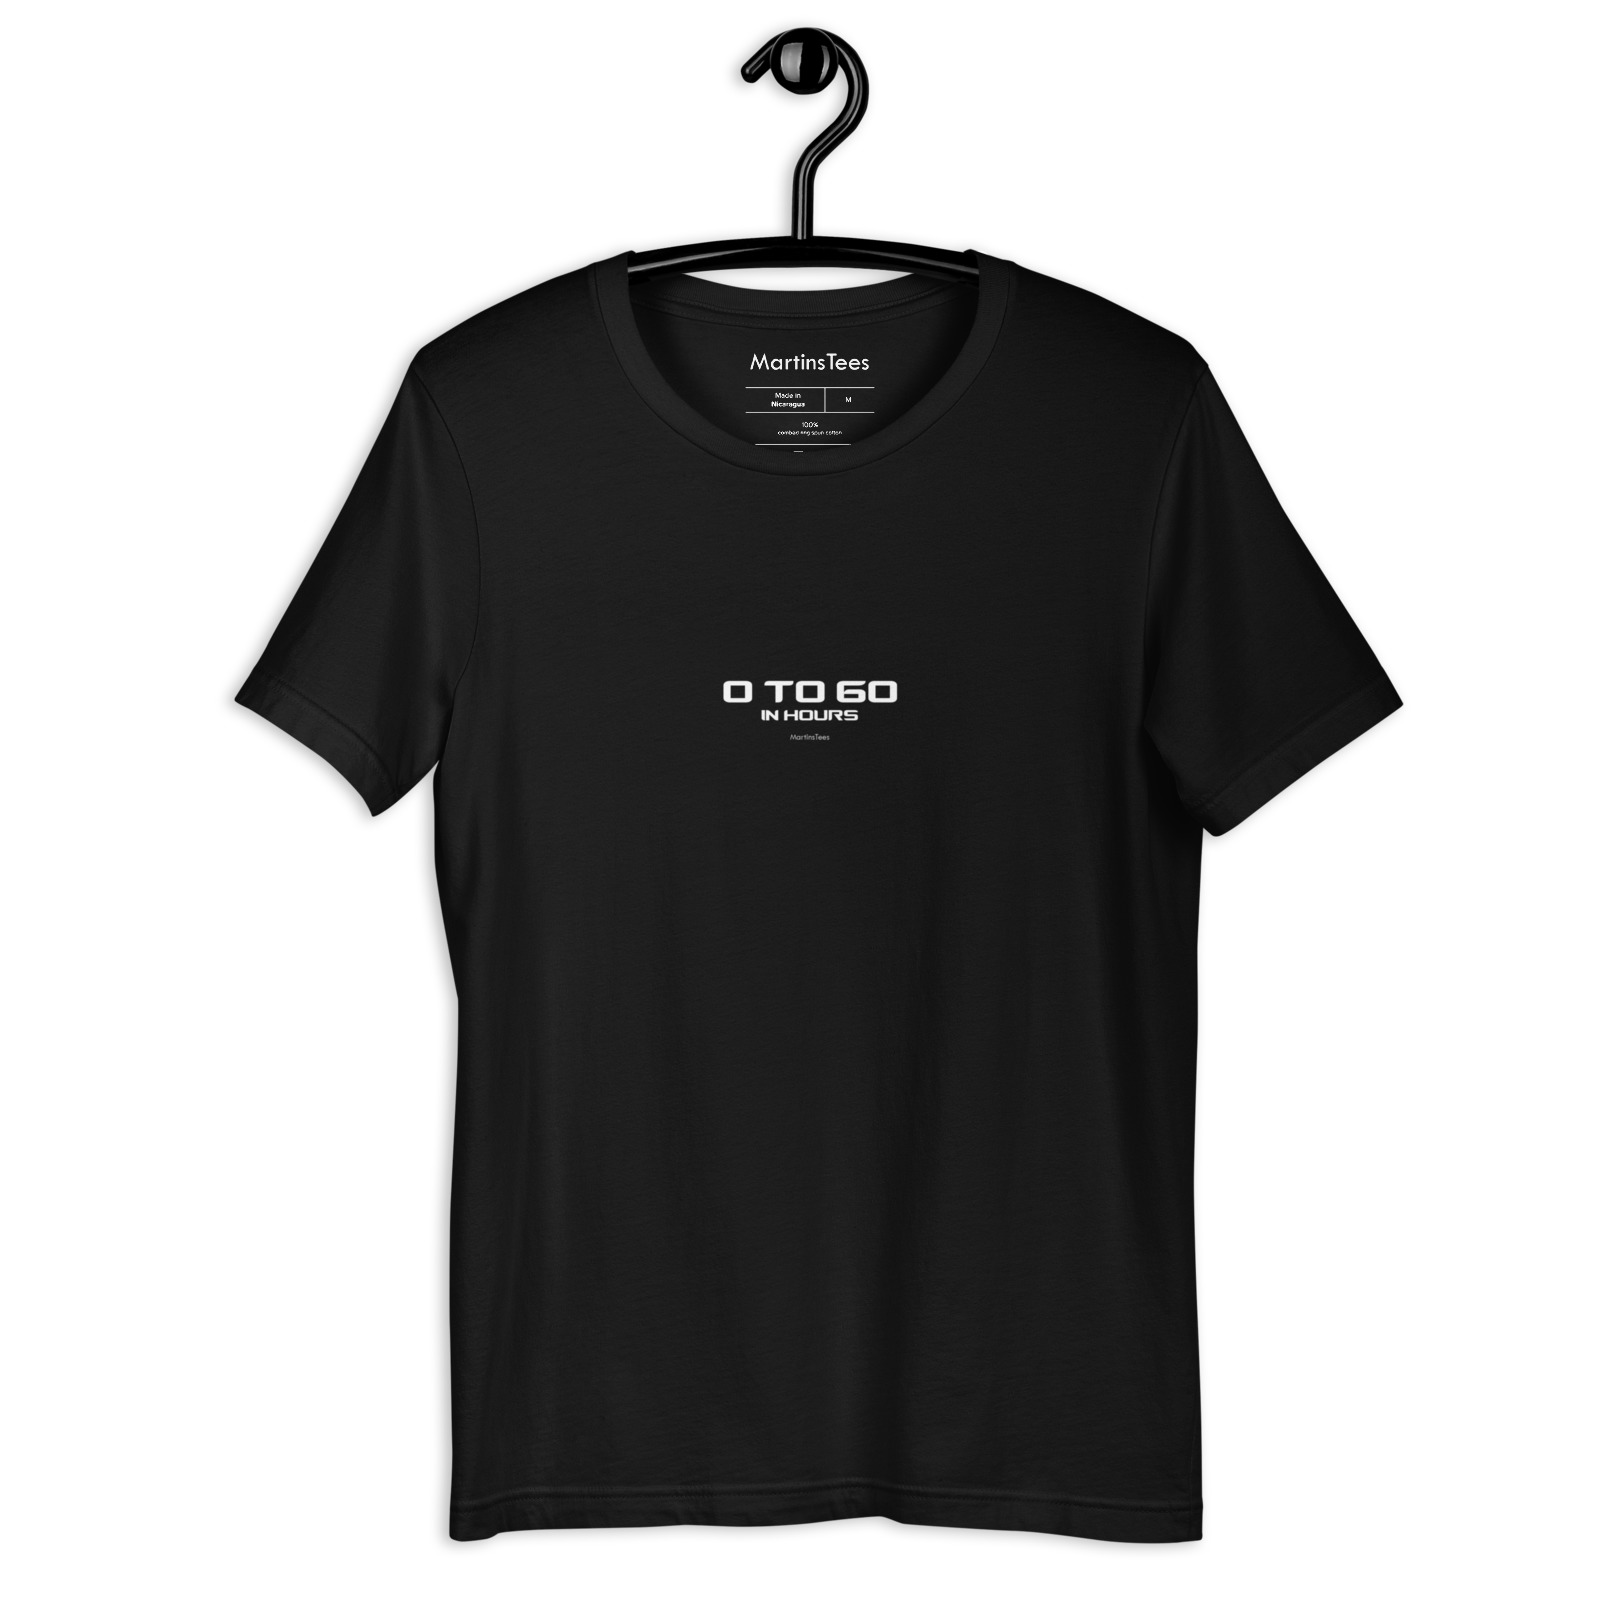 T-shirt: 0 TO 60 - IN HOURS